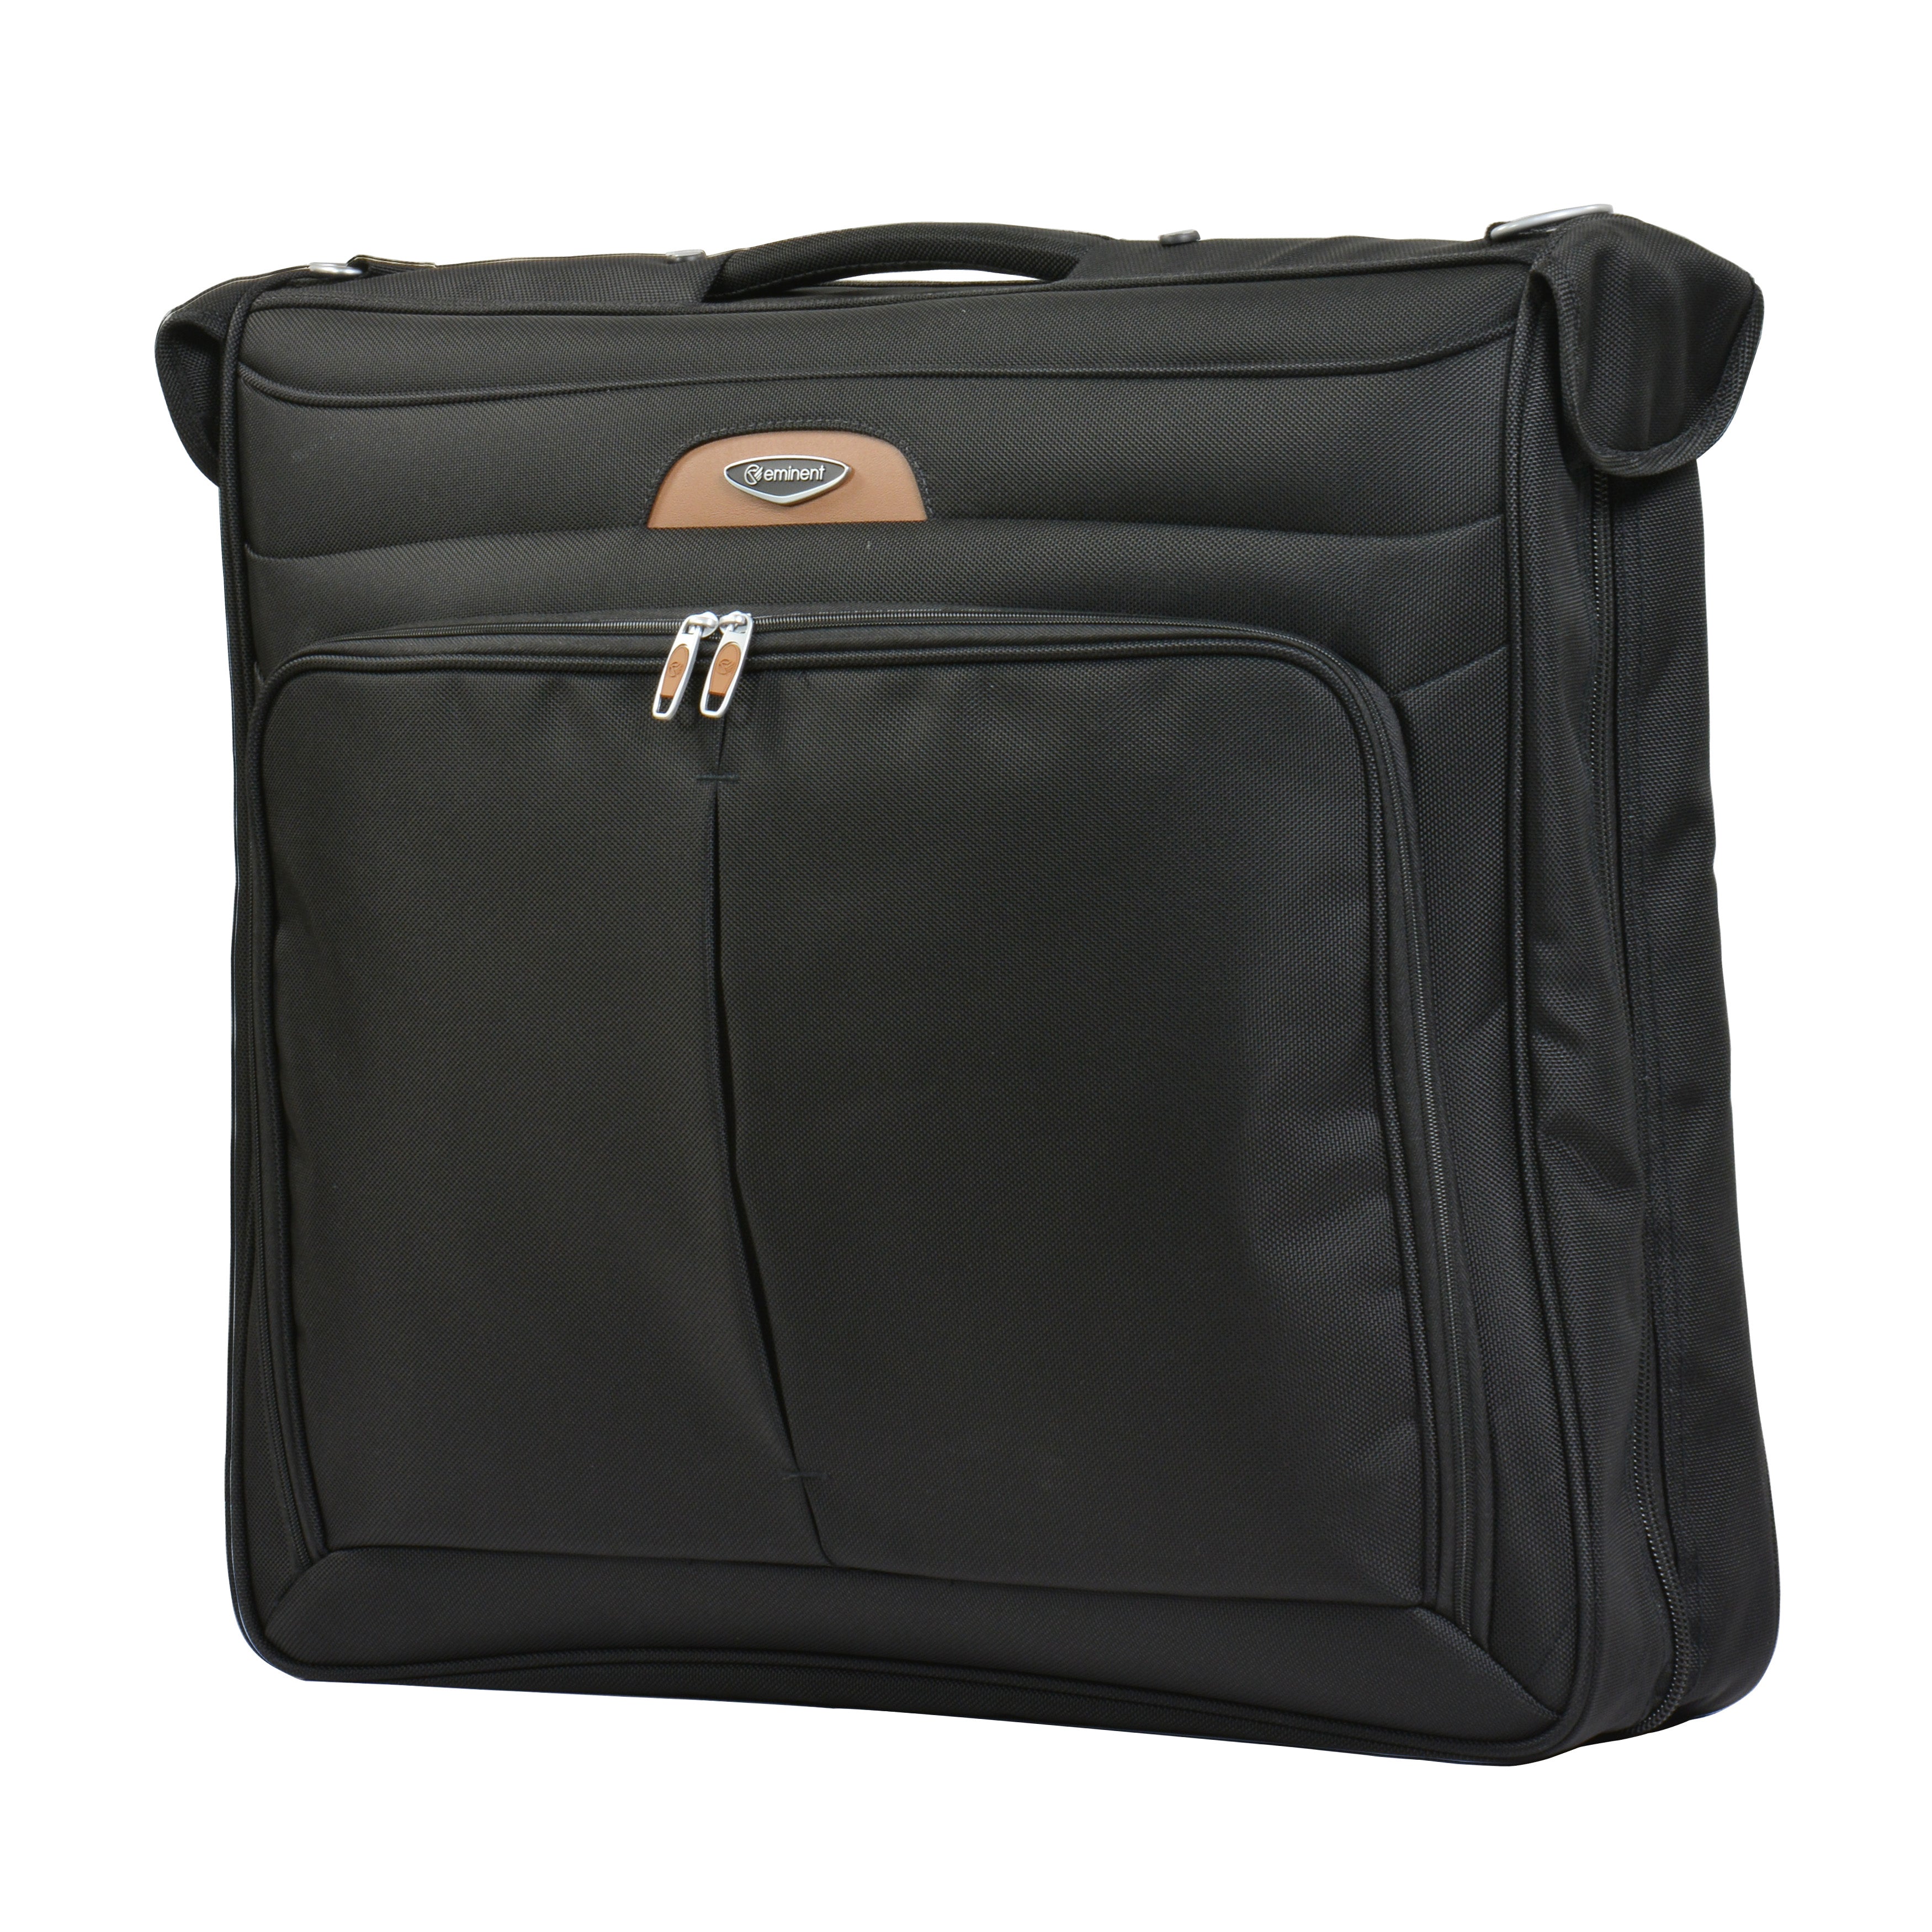 Eminent 44" 1680D Nylon Suitcover (S0180-44) - buyluggageonline